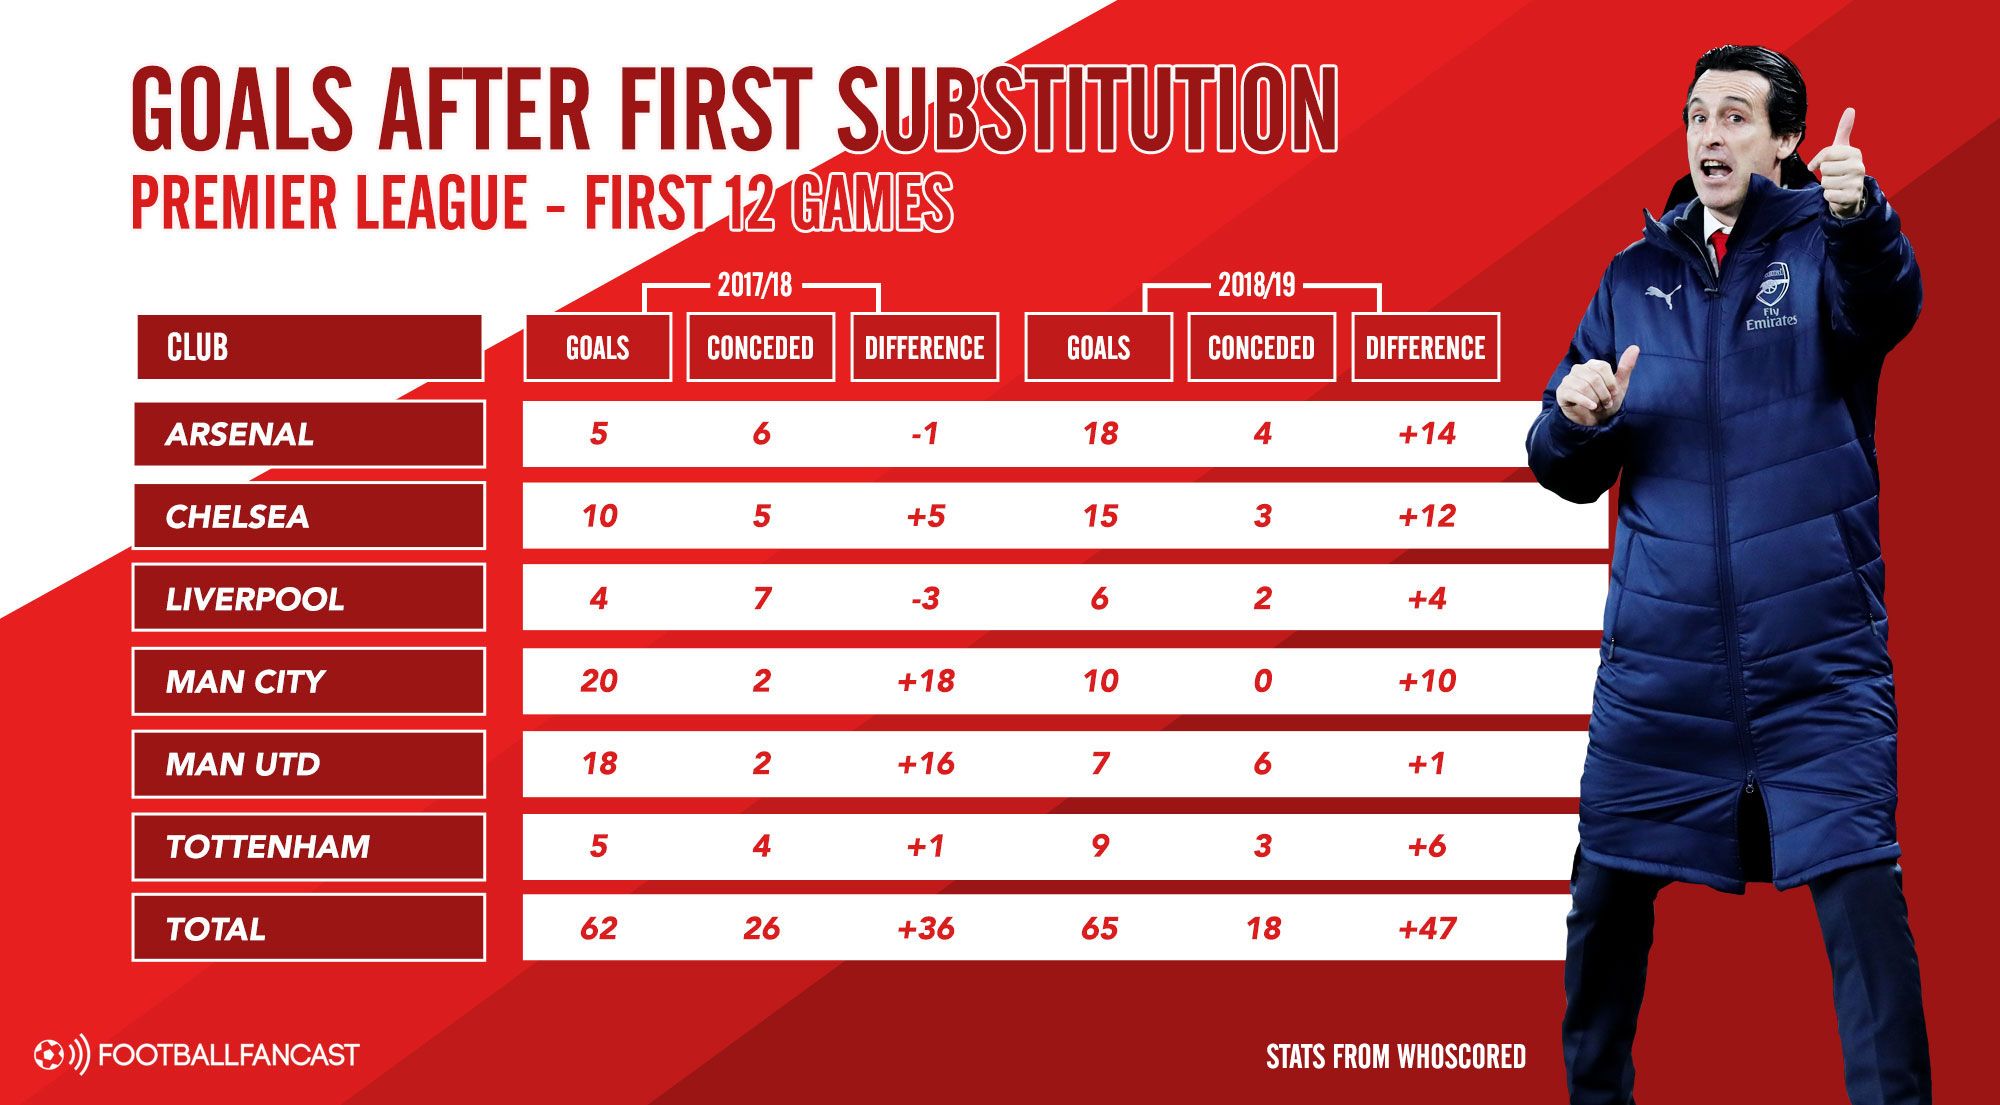 Goals after substitutions - Goal Difference